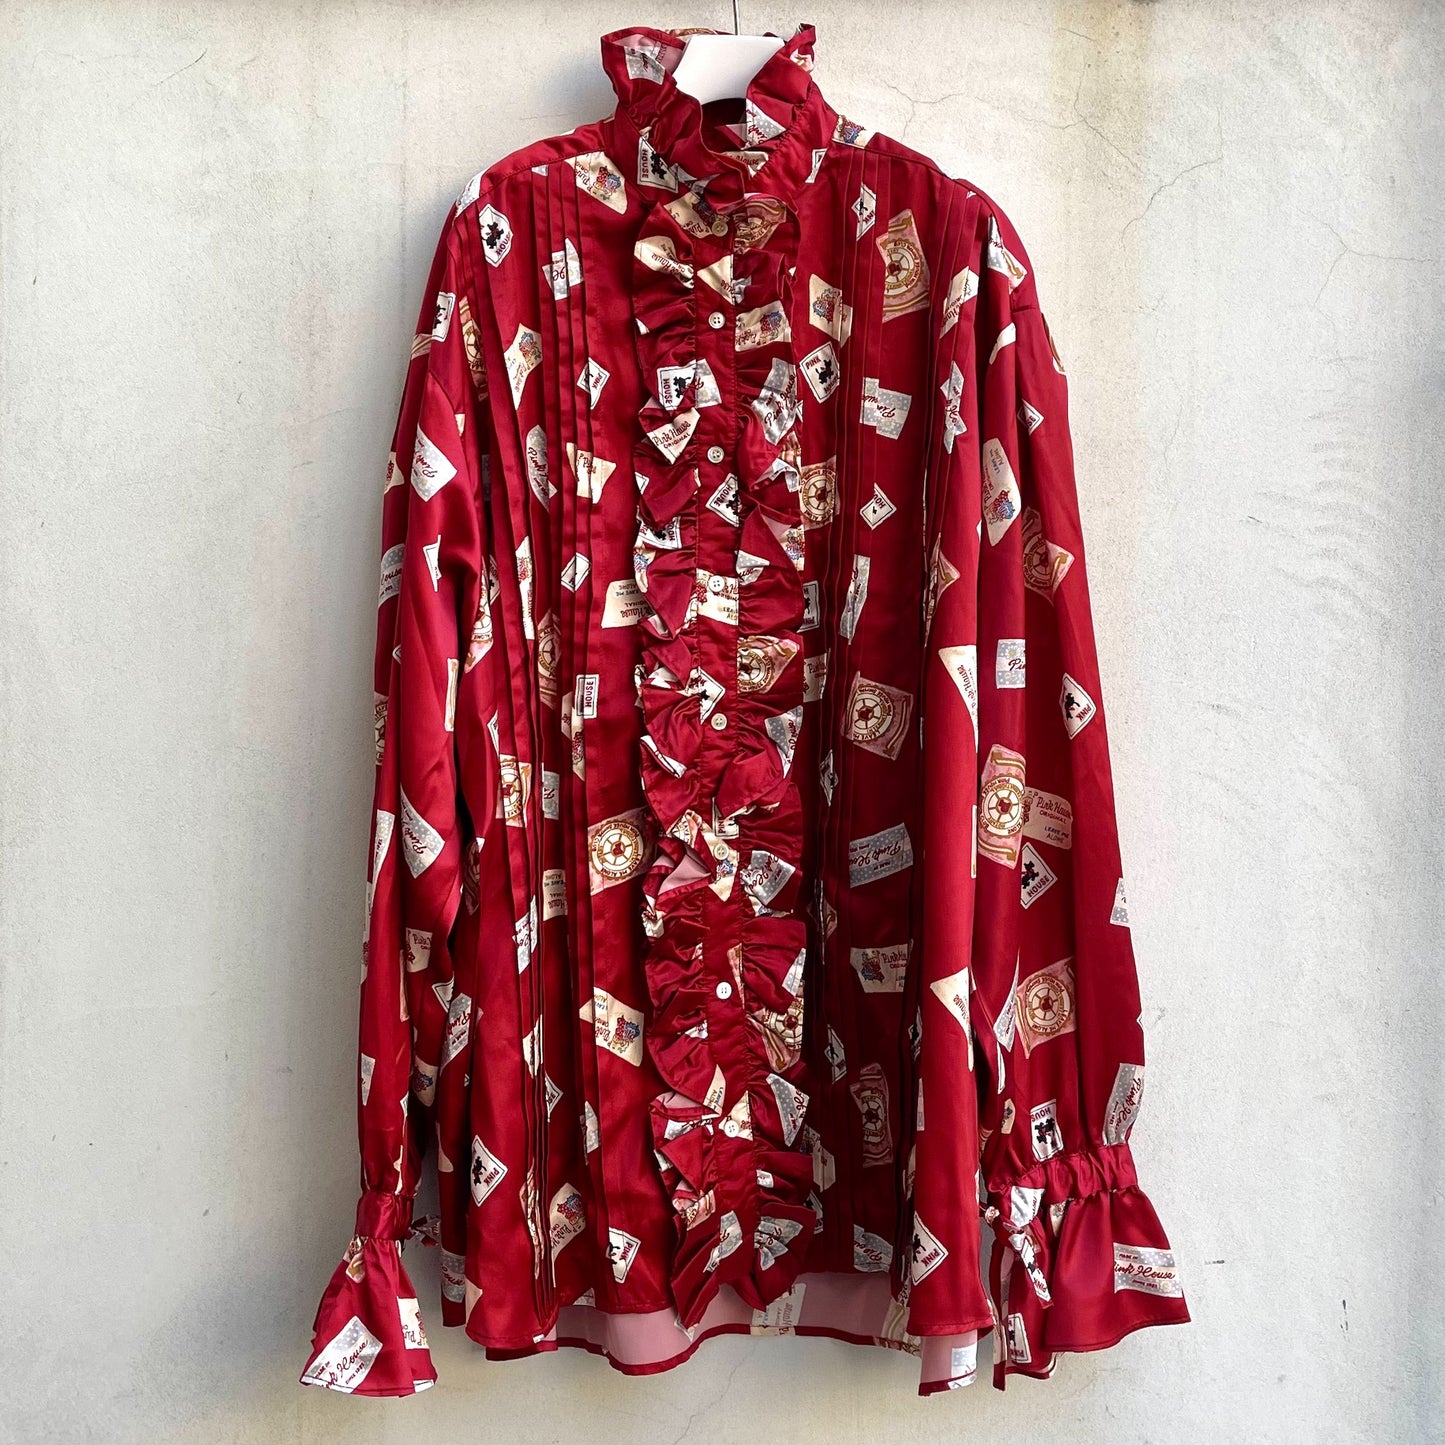 【MIKIOSAKABE×PINK HOUSE】blouse / red / レッドフリルブラウス